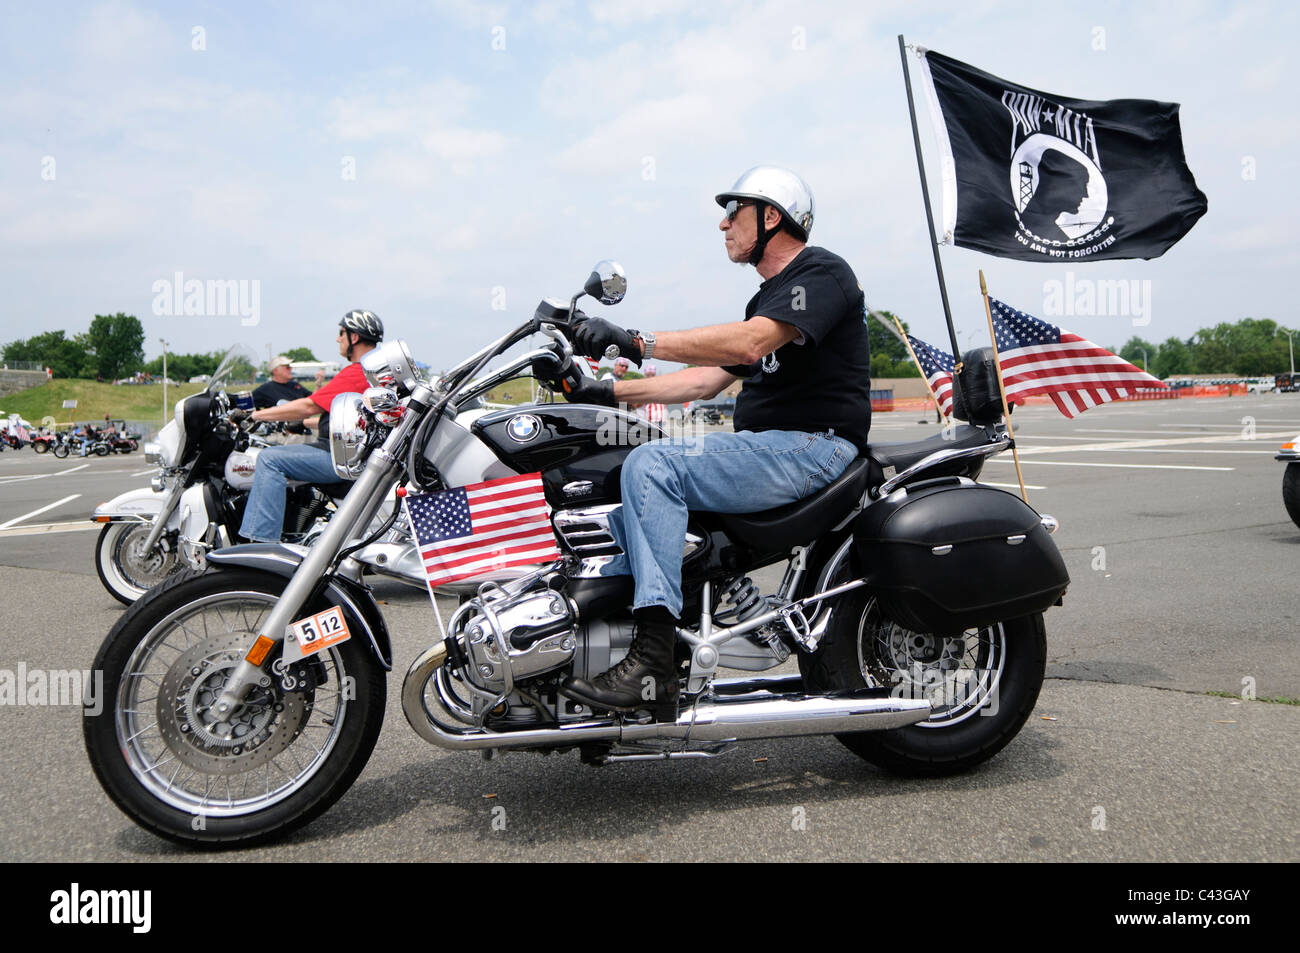 ARLINGTON, VA - A rider with a POW-MIA (Prisoner of War - Missing in Action) flag participating in the annual Rolling Thunder motorcycle rally through downtown Washington DC on May 29, 2011. This shot was taken as the riders were leaving the staging area in the Pentagon's north parking lot, where thousands of bikes and riders had gathered. Stock Photo